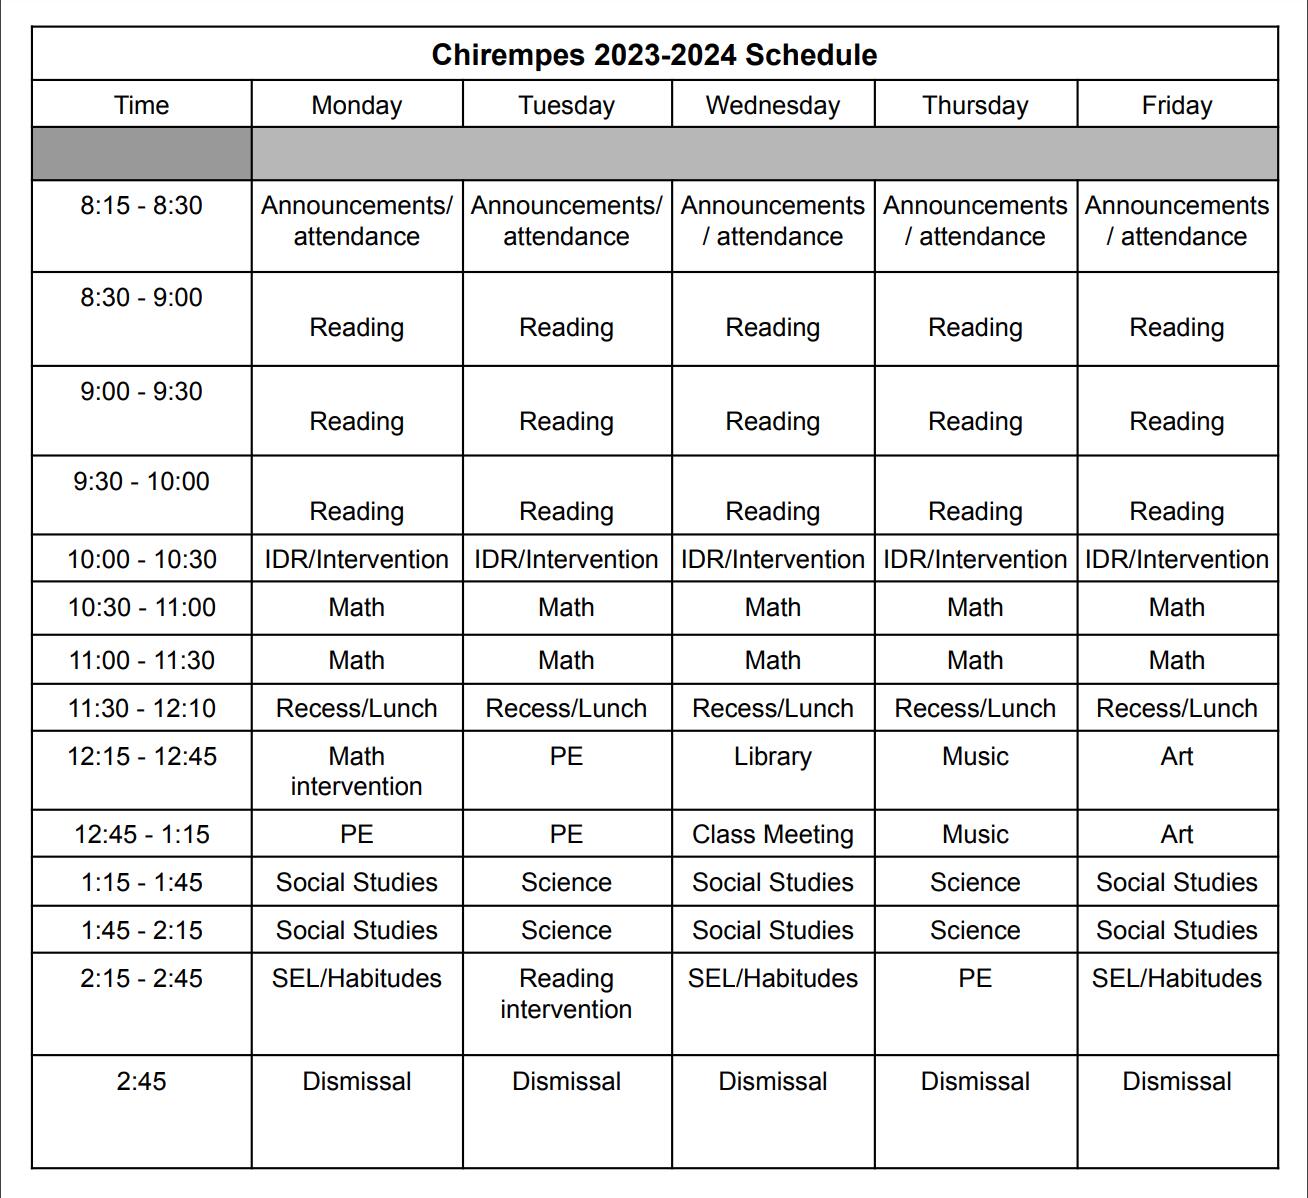 Chirempes' Daily Schedule